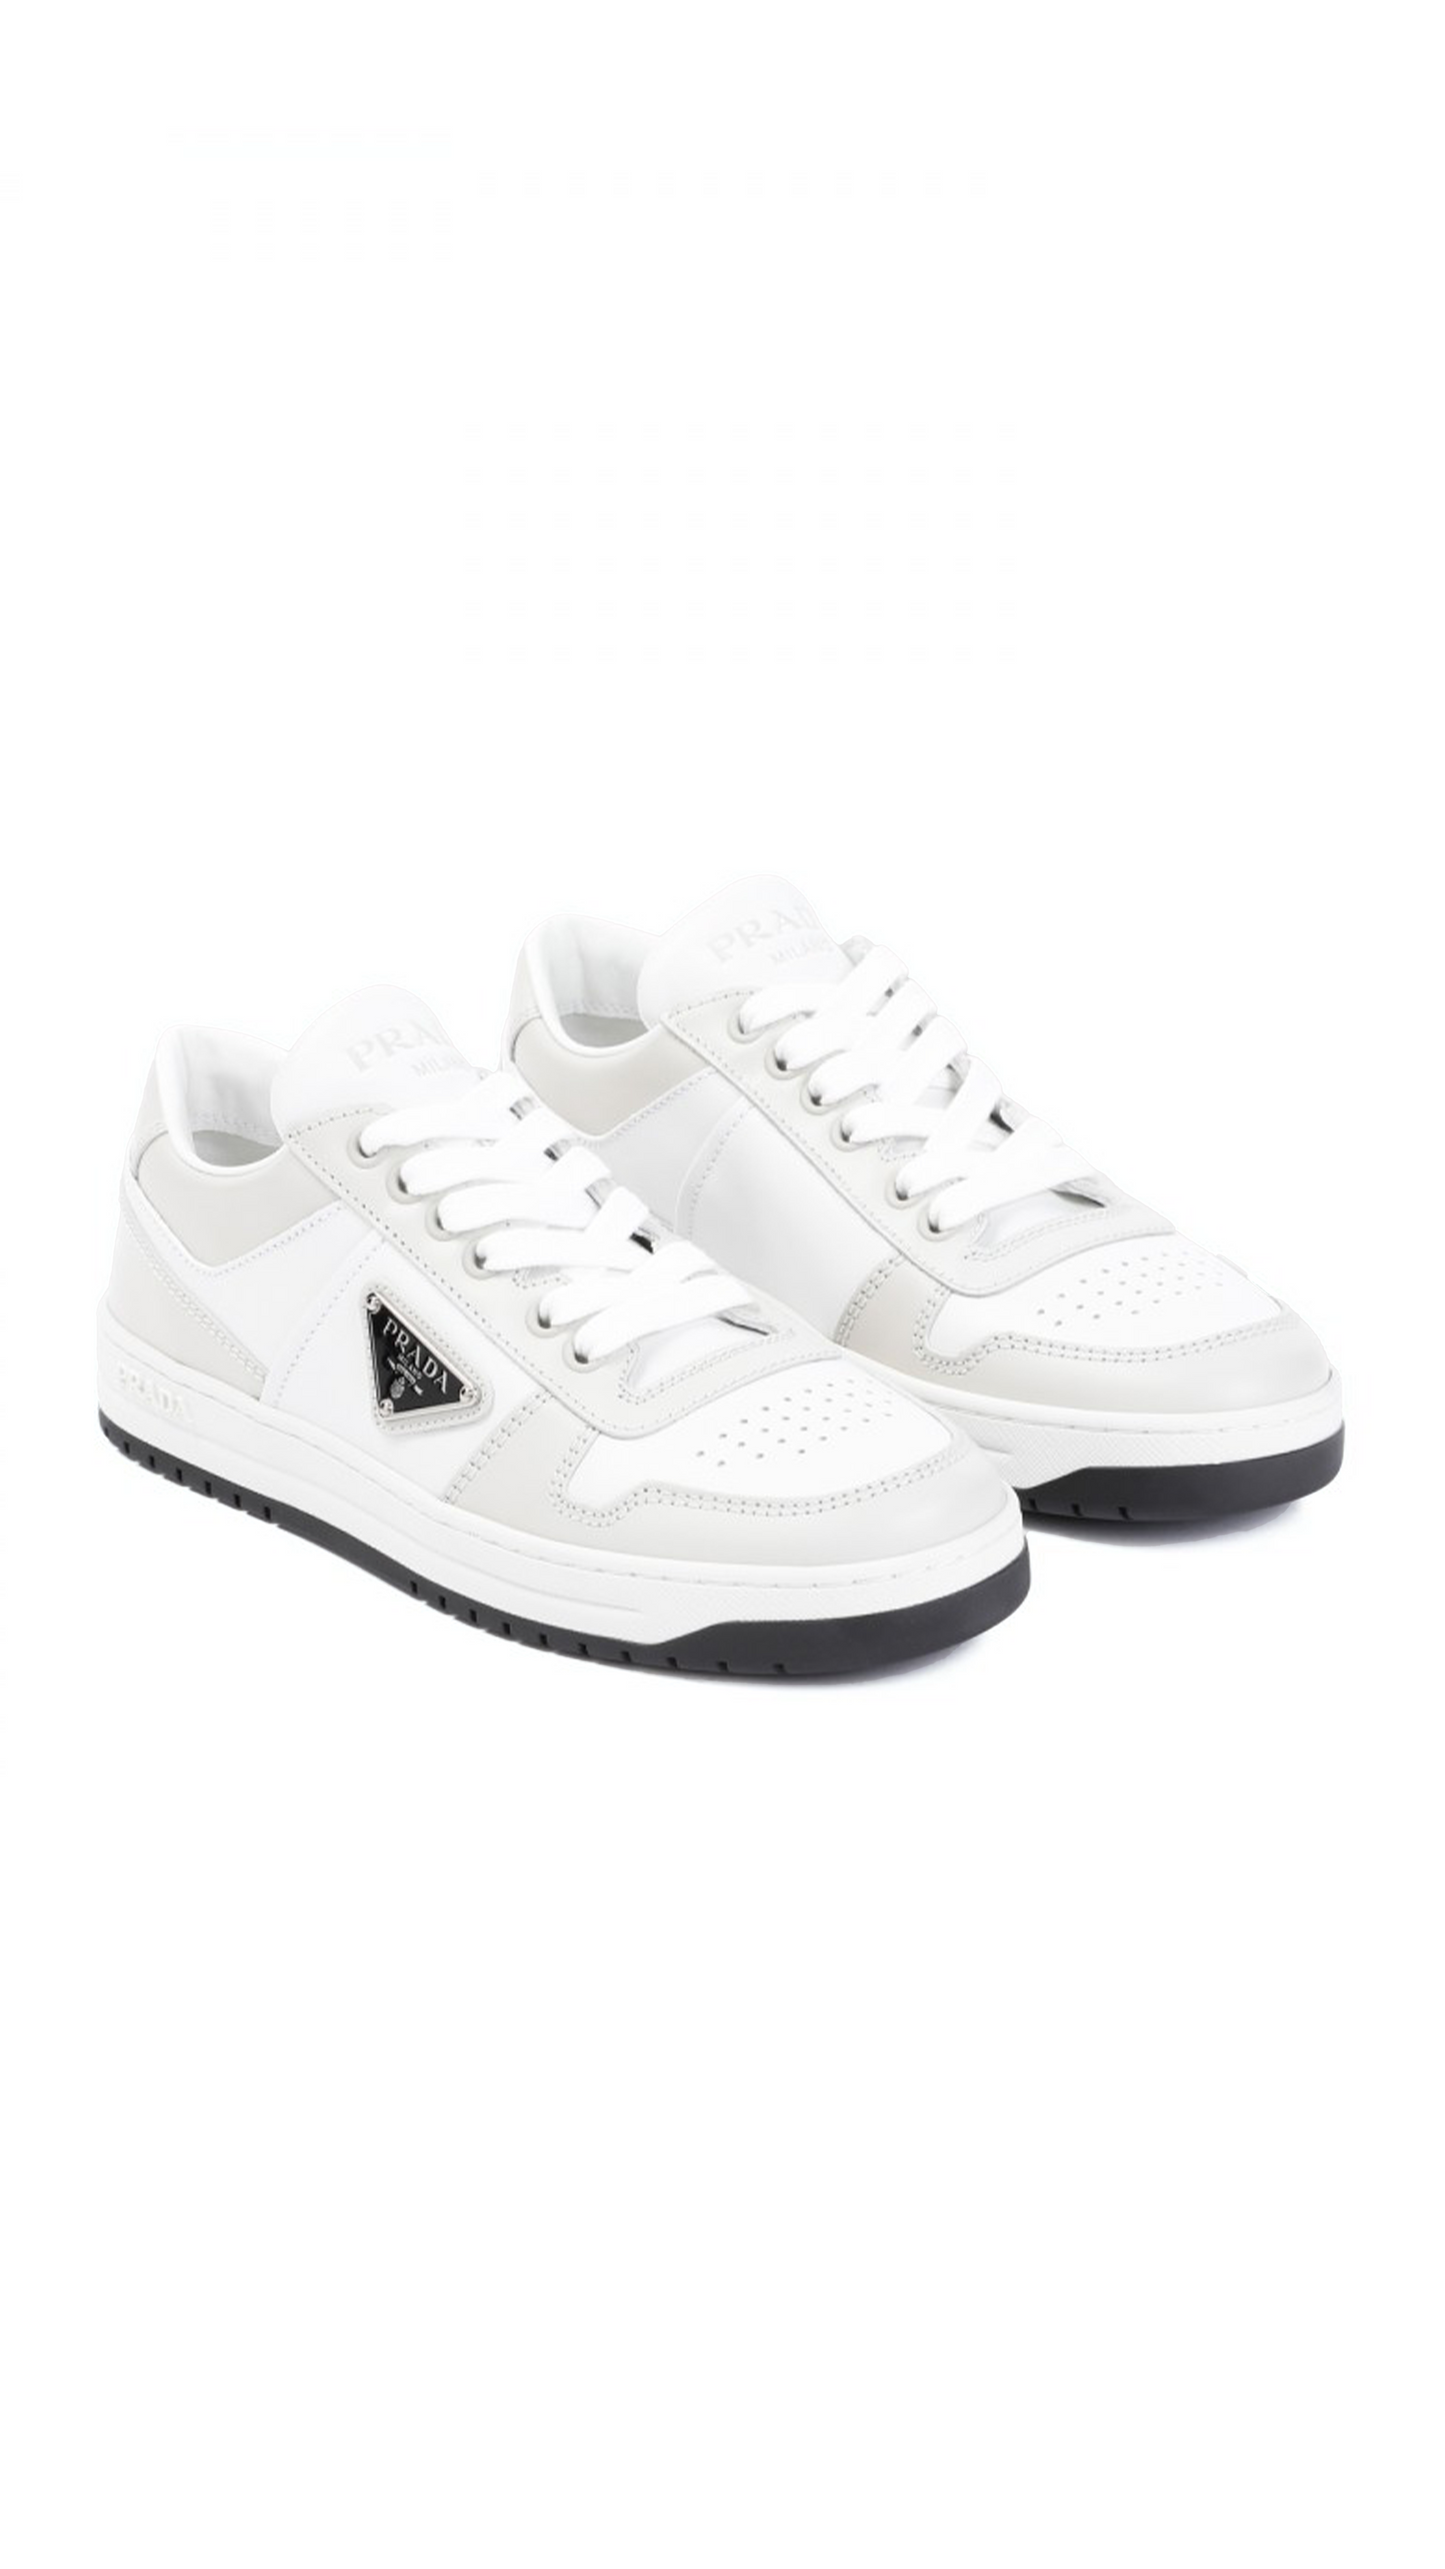 Downtown Sneakers - White/Light Grey